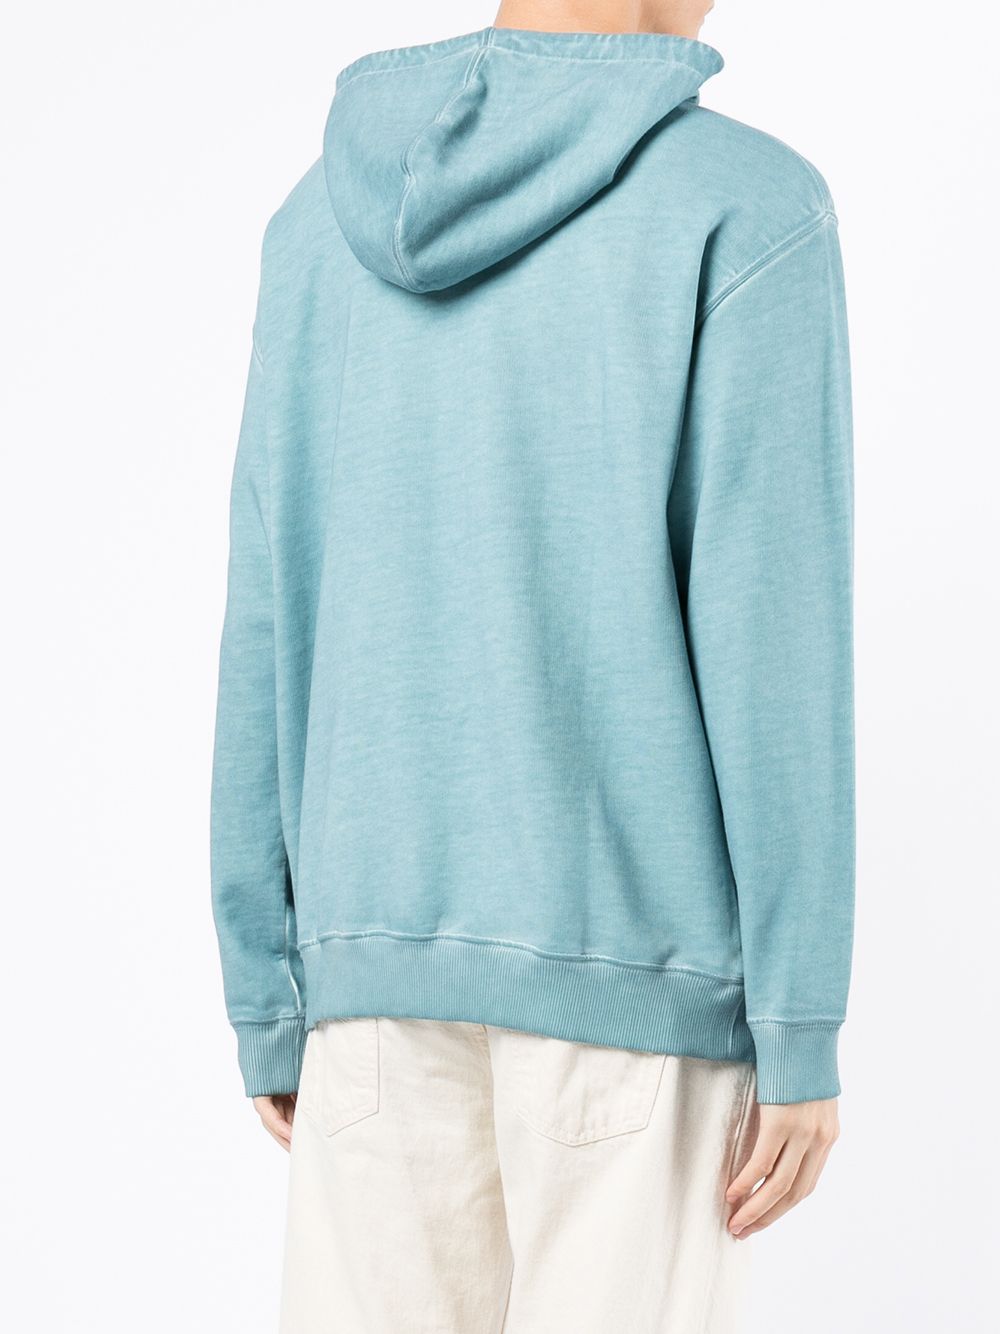 Shop Emporio Armani logo-print detail hoodie with Express Delivery ...